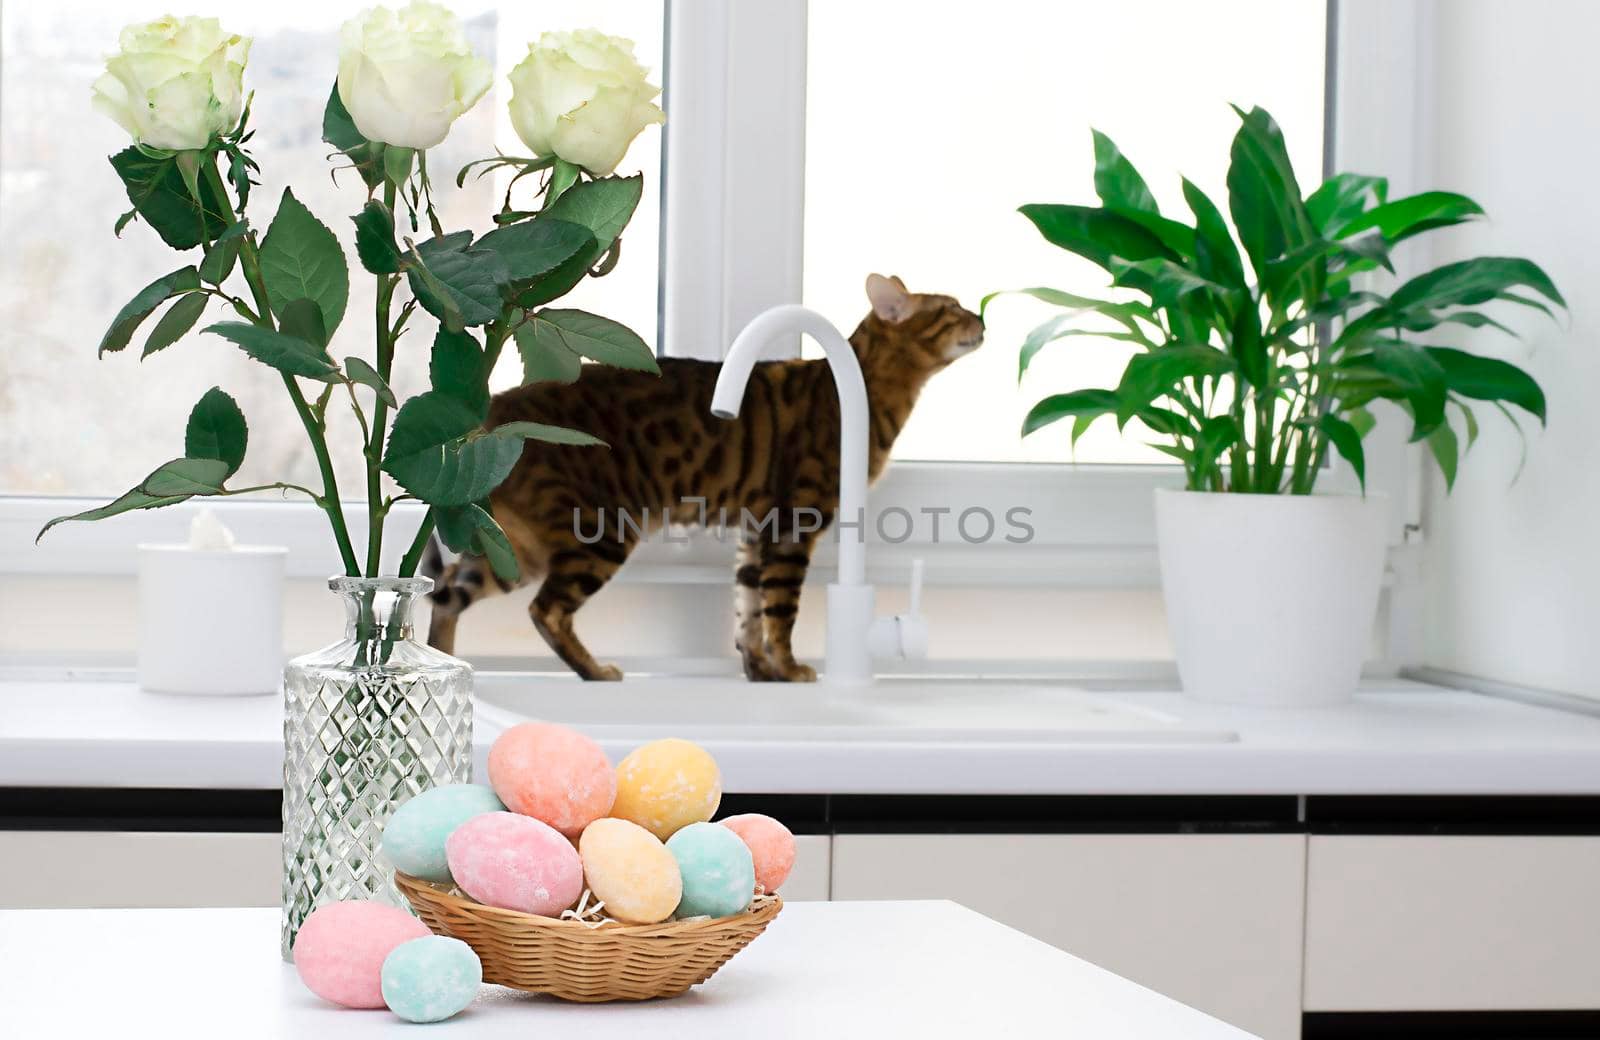 A wicker basket with multi-colored Easter eggs and a vase with white roses against the background of a Bengal cat by the window. by ketlit